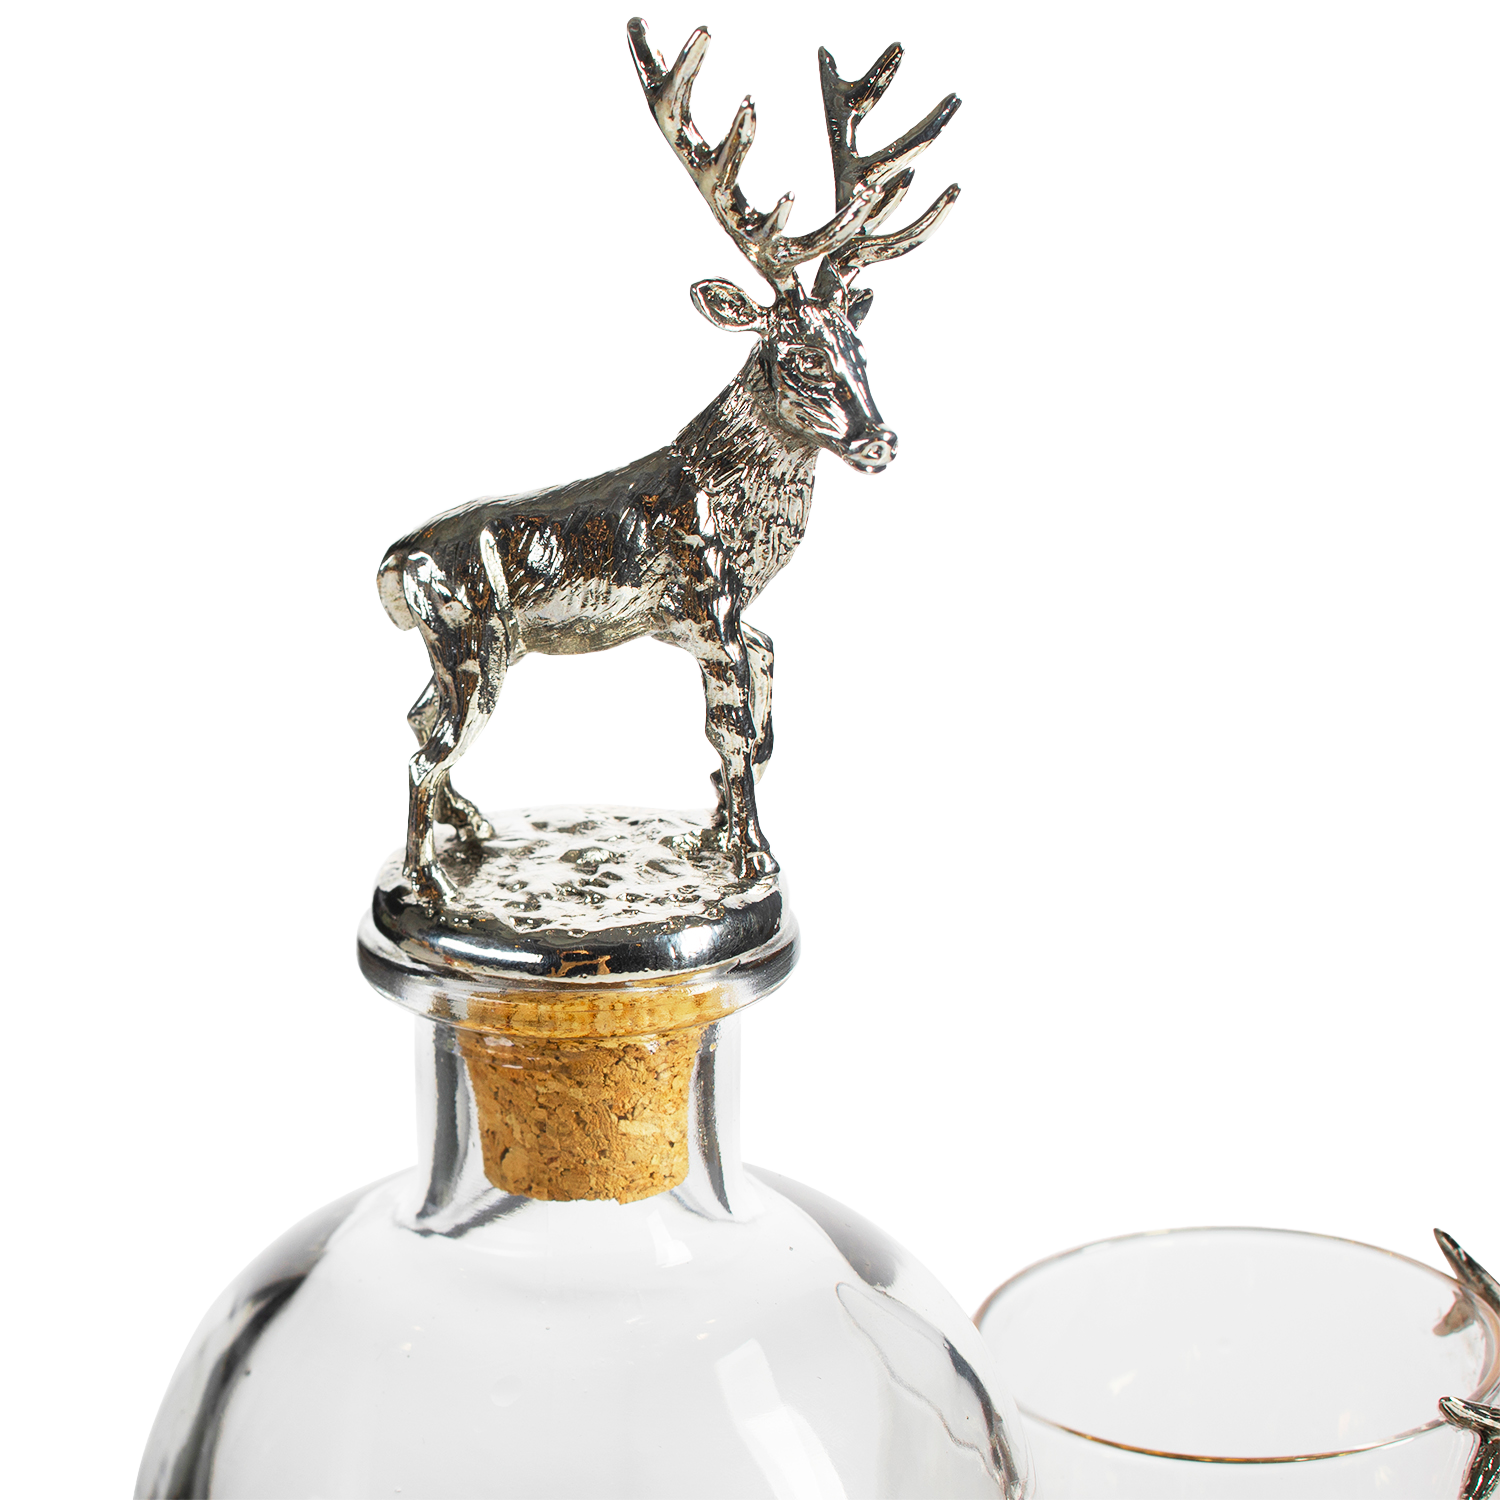 Stag Antler Decanter Set with 2 Stag Glasses - Antique Pewter Whiskey Decanter Set Elegant Liquor Decanter Gift Set for Bar by The Wine Savant - Luxury Decanter for Bourbon, Scotch, or Whiskey 750ml-2